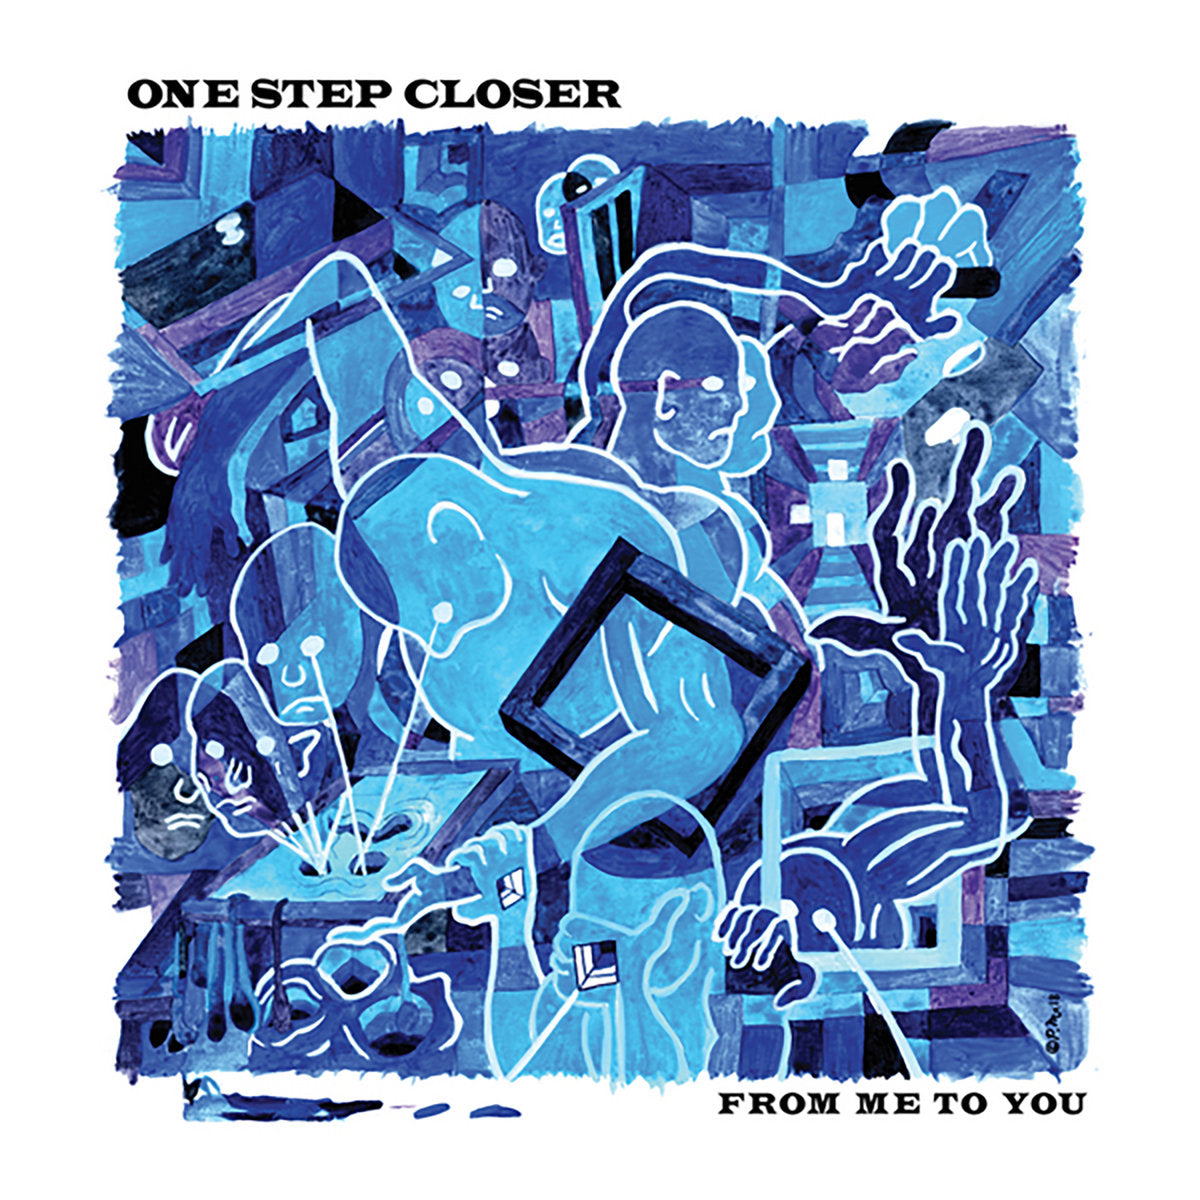 One Step Closer "From Me To You" 12" Vinyl